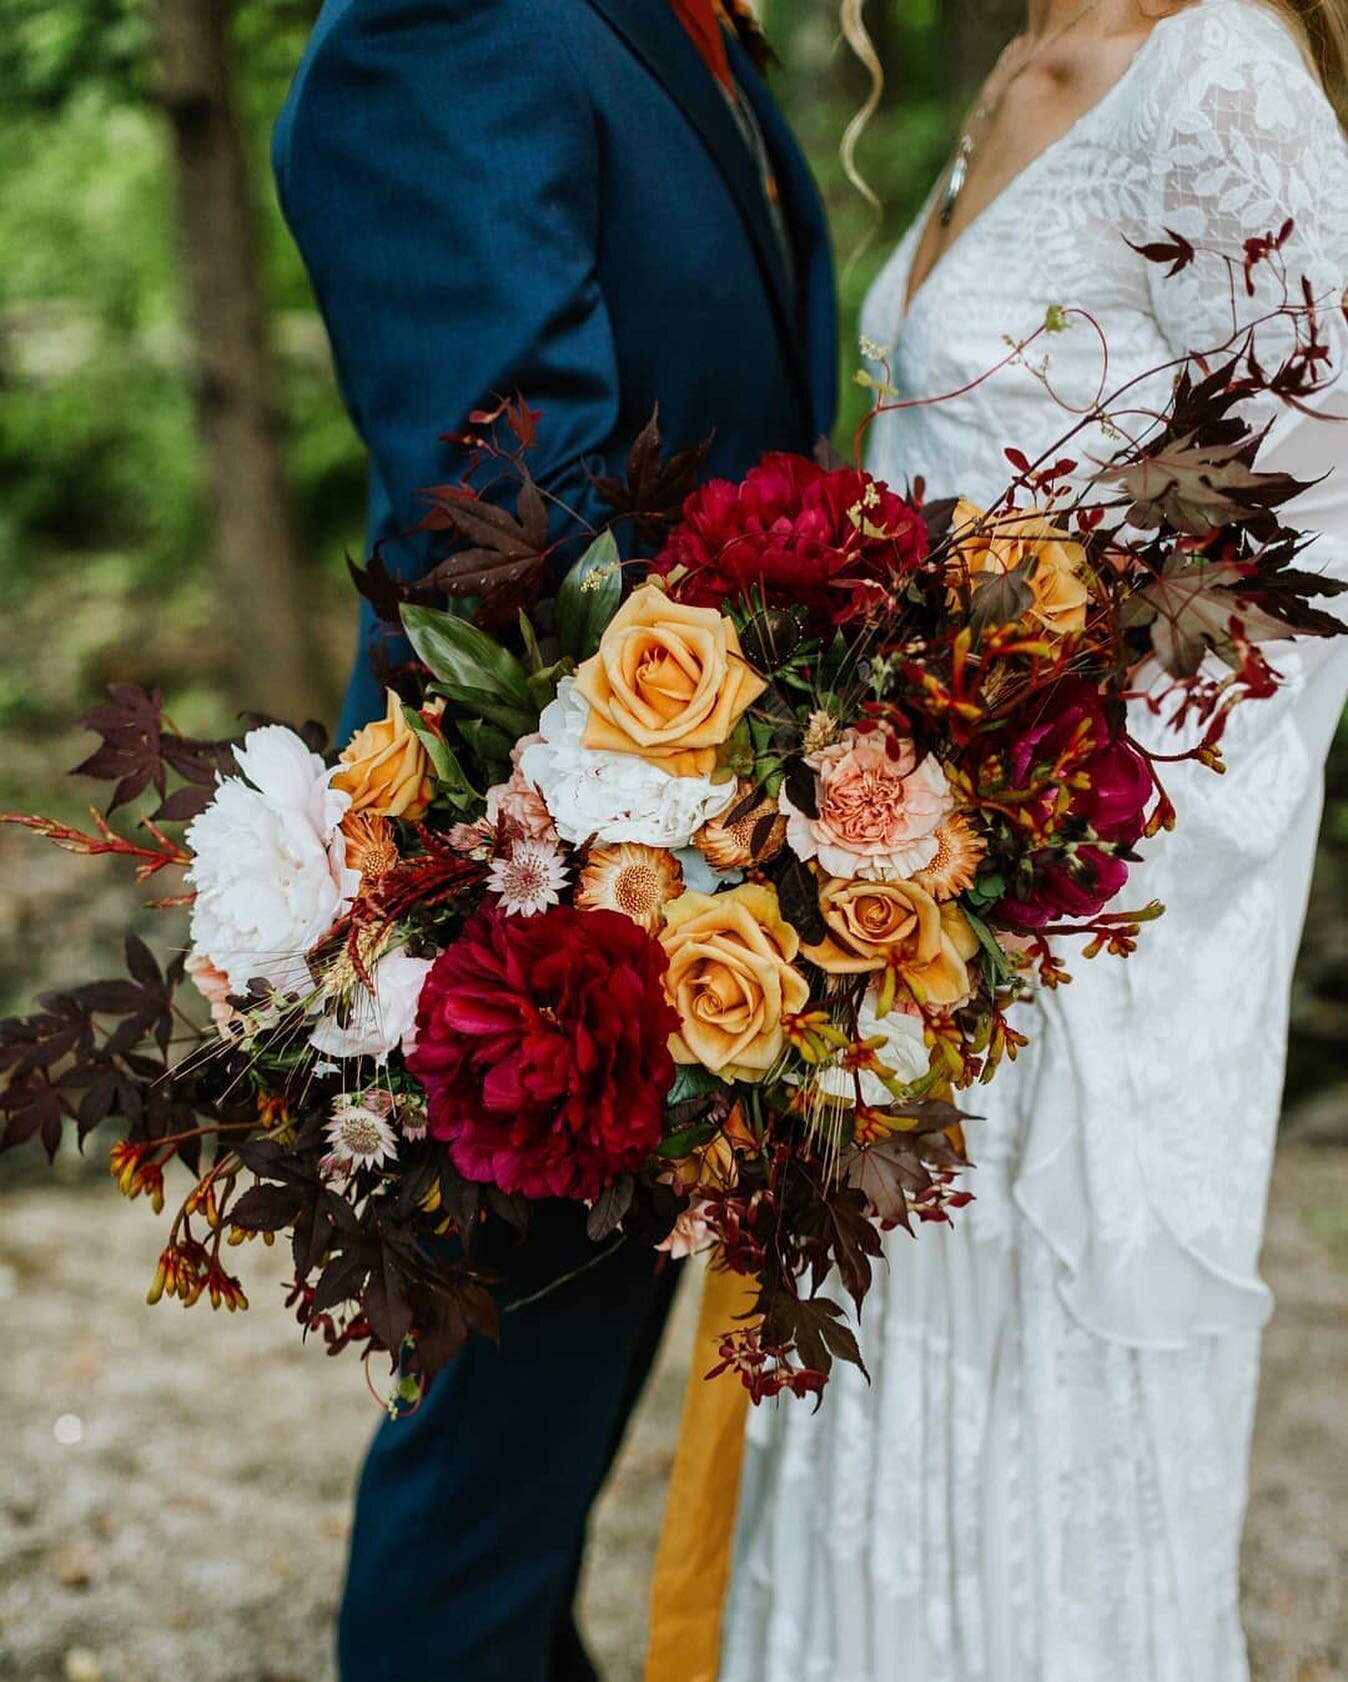 April Showers bring May flowers. So what better month to showcase some of the amazing florists we have the pleasure of working with and highlight their distinct styles! 
&bull;
First up, @badrabbitflowers! Anika has done more arrangements here at the